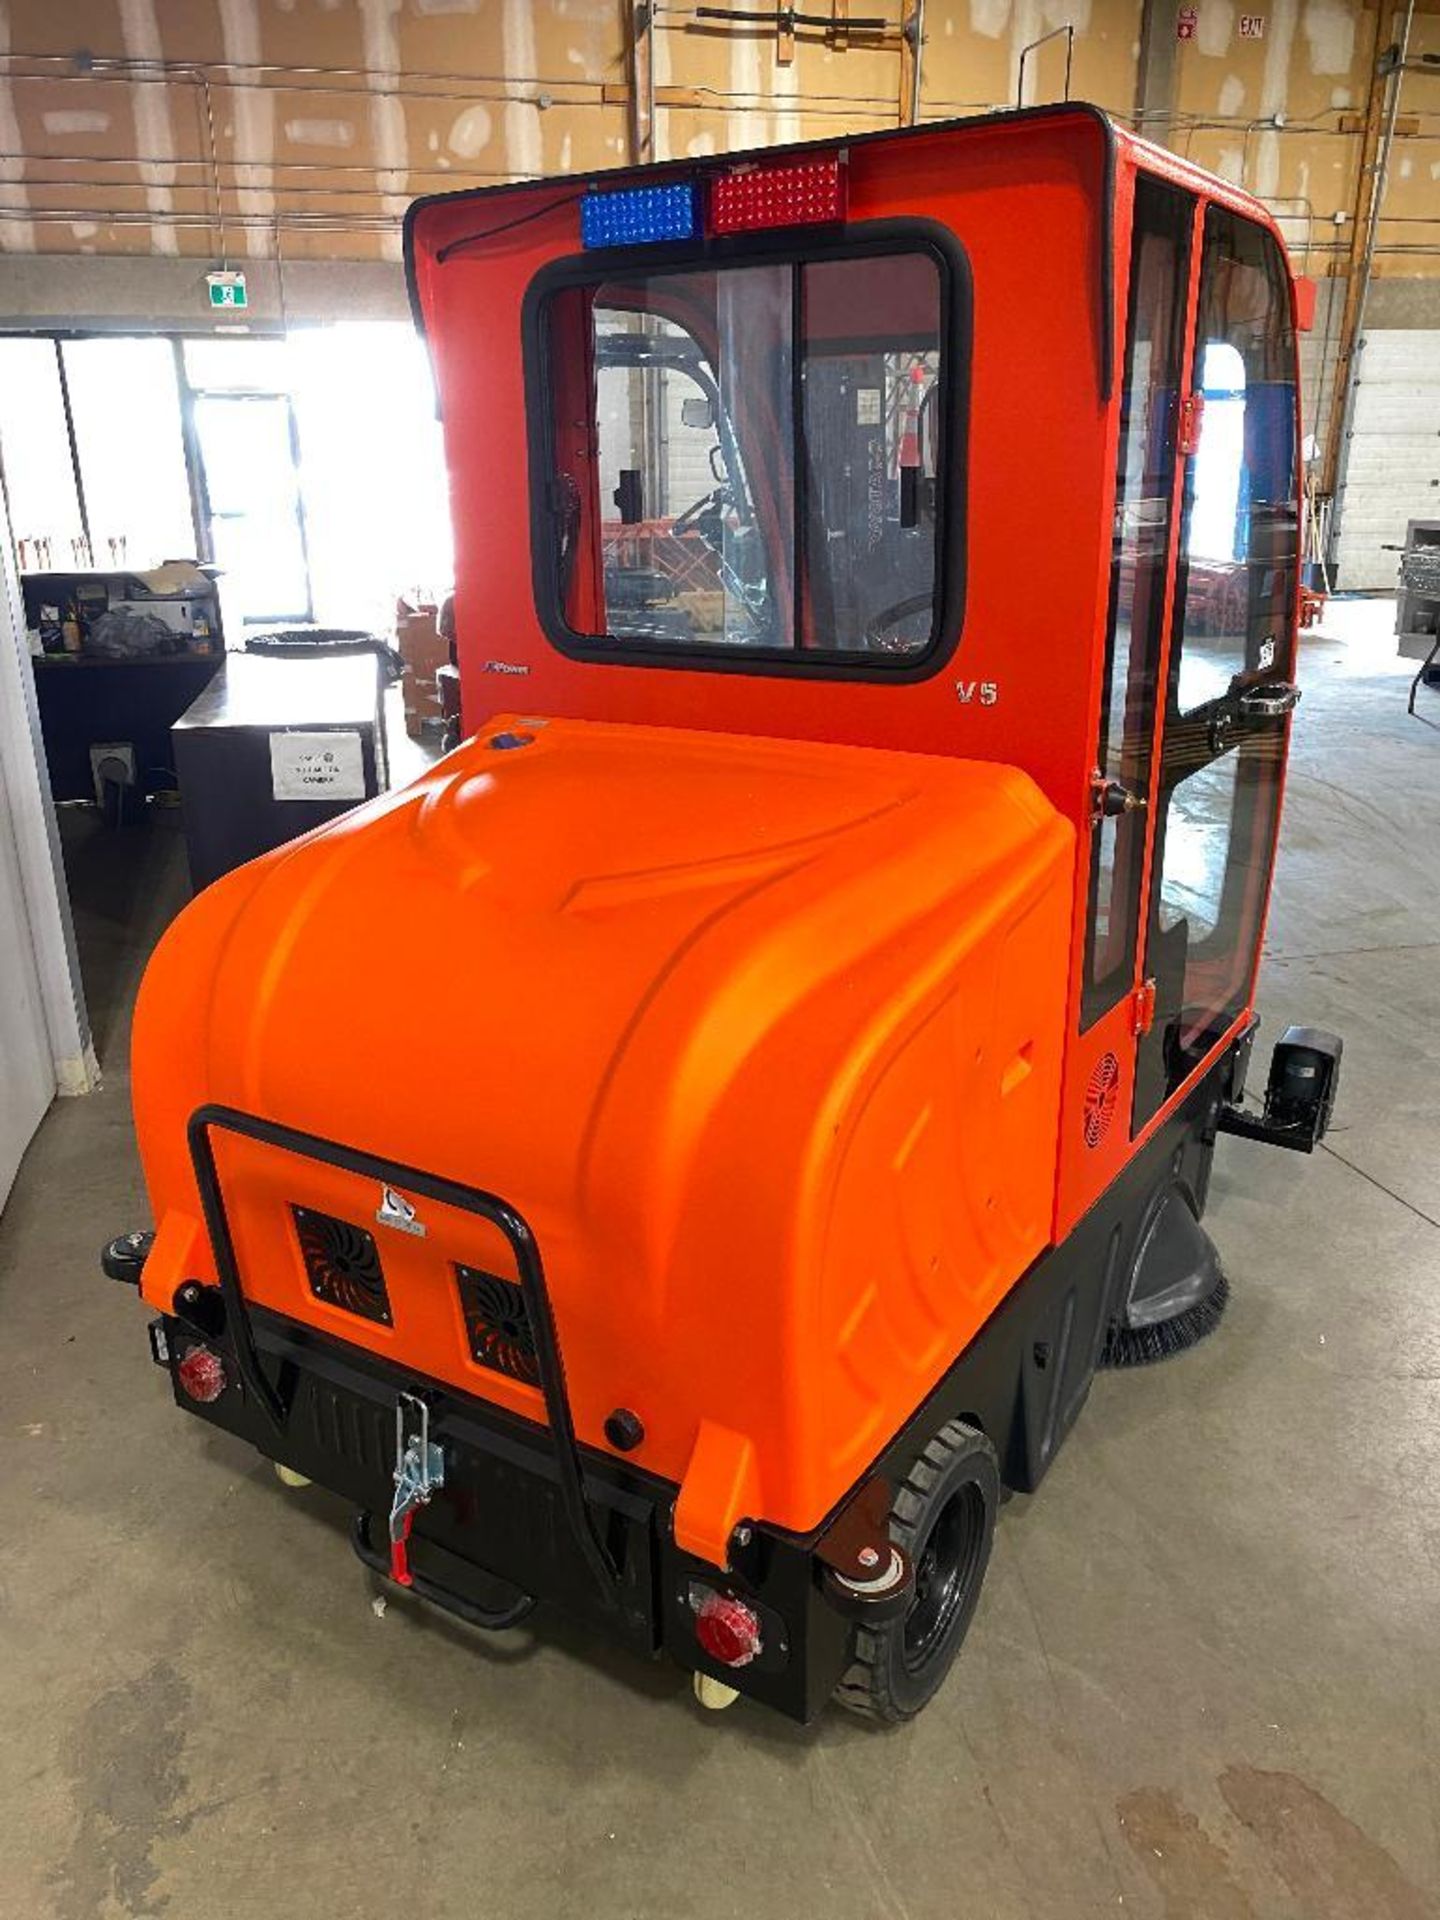 New 2022 Aokeqi 0S-V5 72" Wide Ride-On Electric Industrial Floor Sweeper - Image 4 of 12